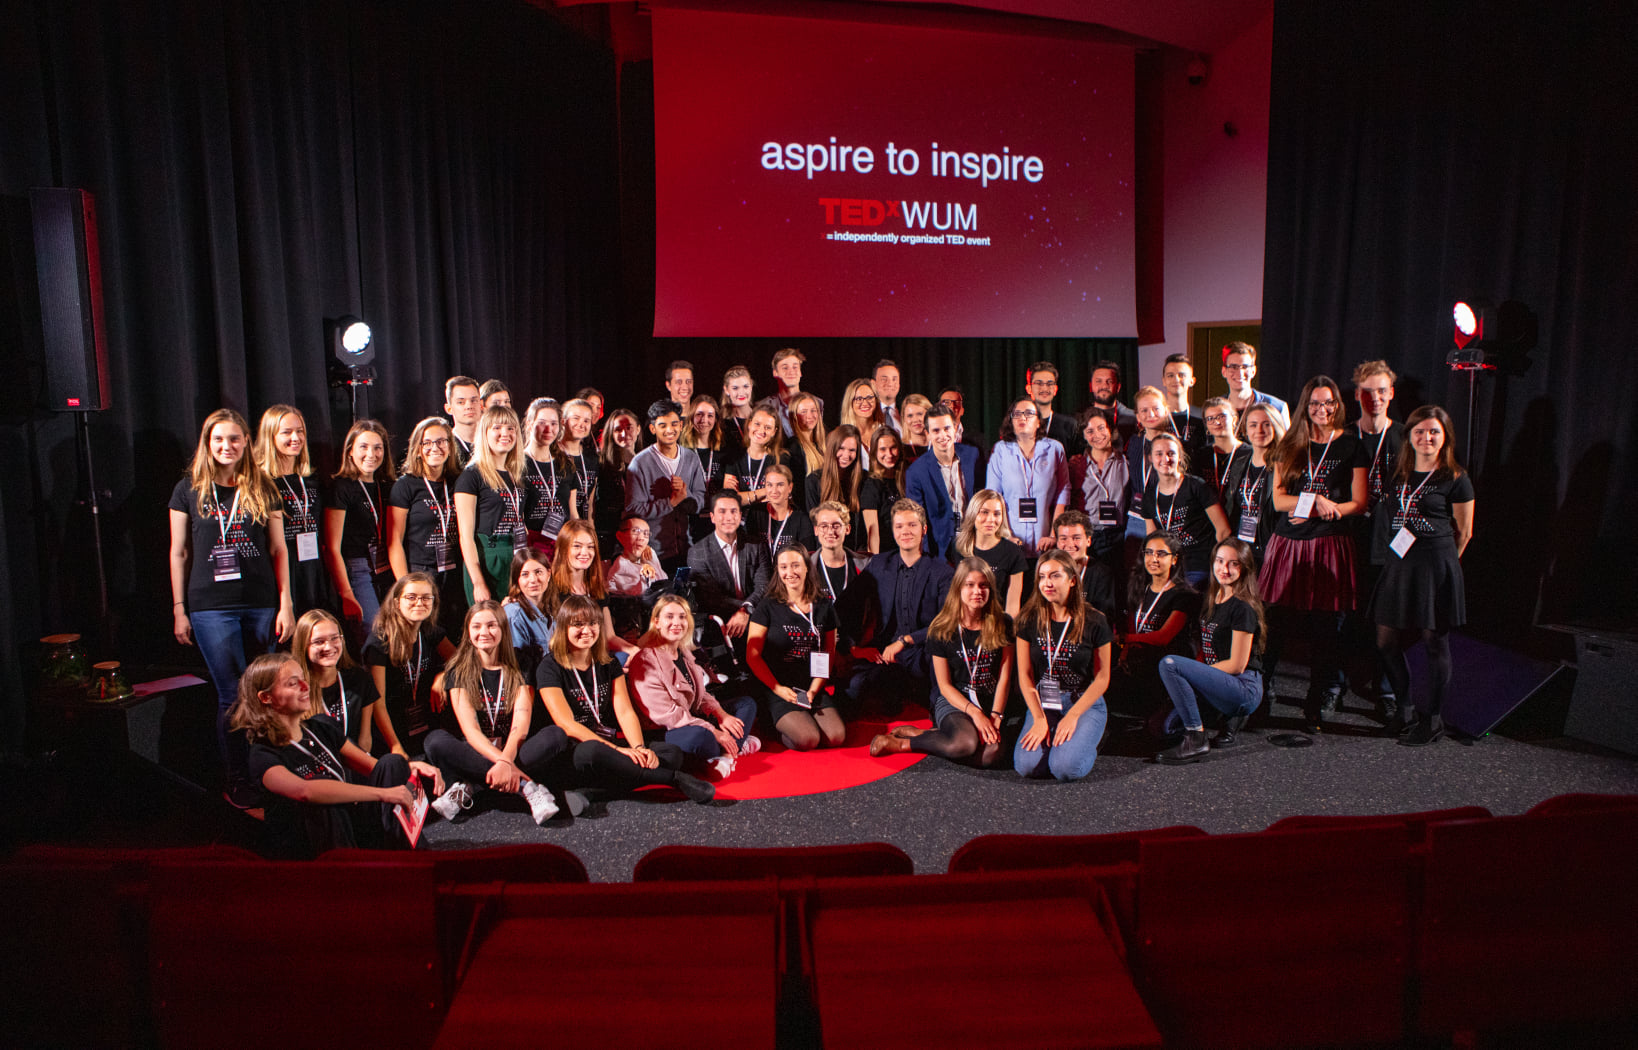 The first edition of TEDxWUM - aspire to inspire! at our University